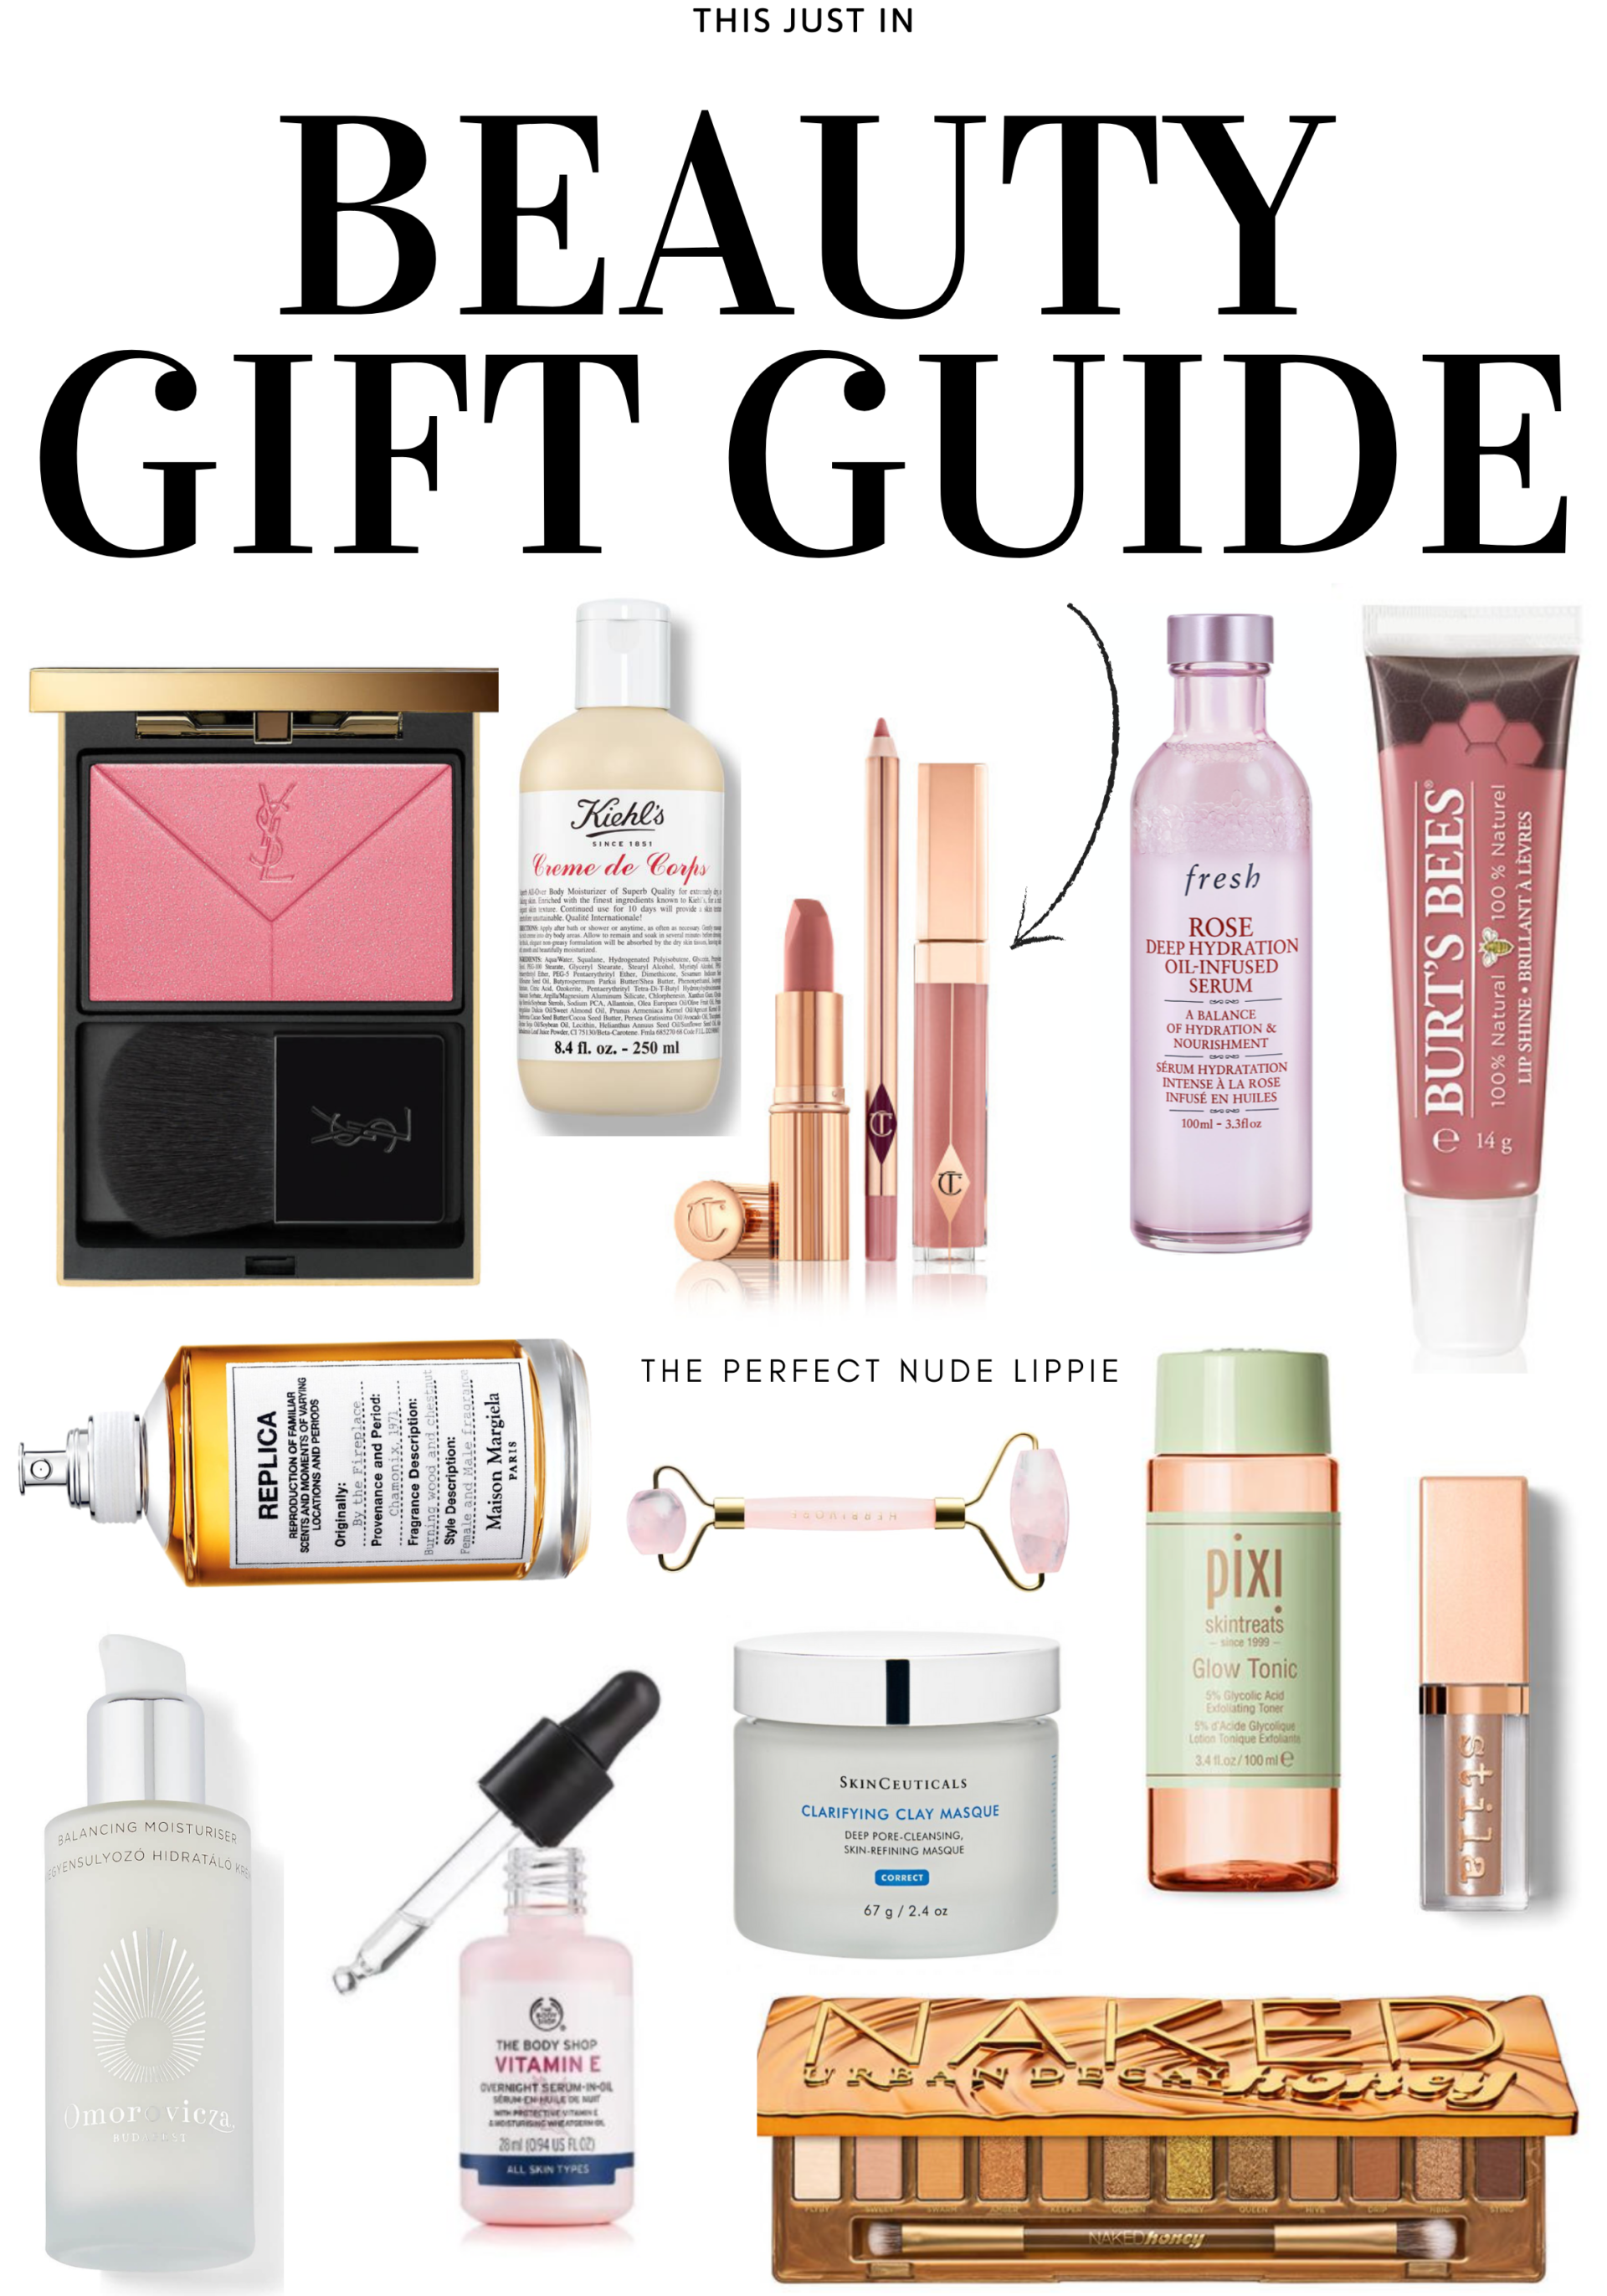 Beauty Gift Guide: The Ultimate Gift Ideas - KRYSTIN TYSIRE